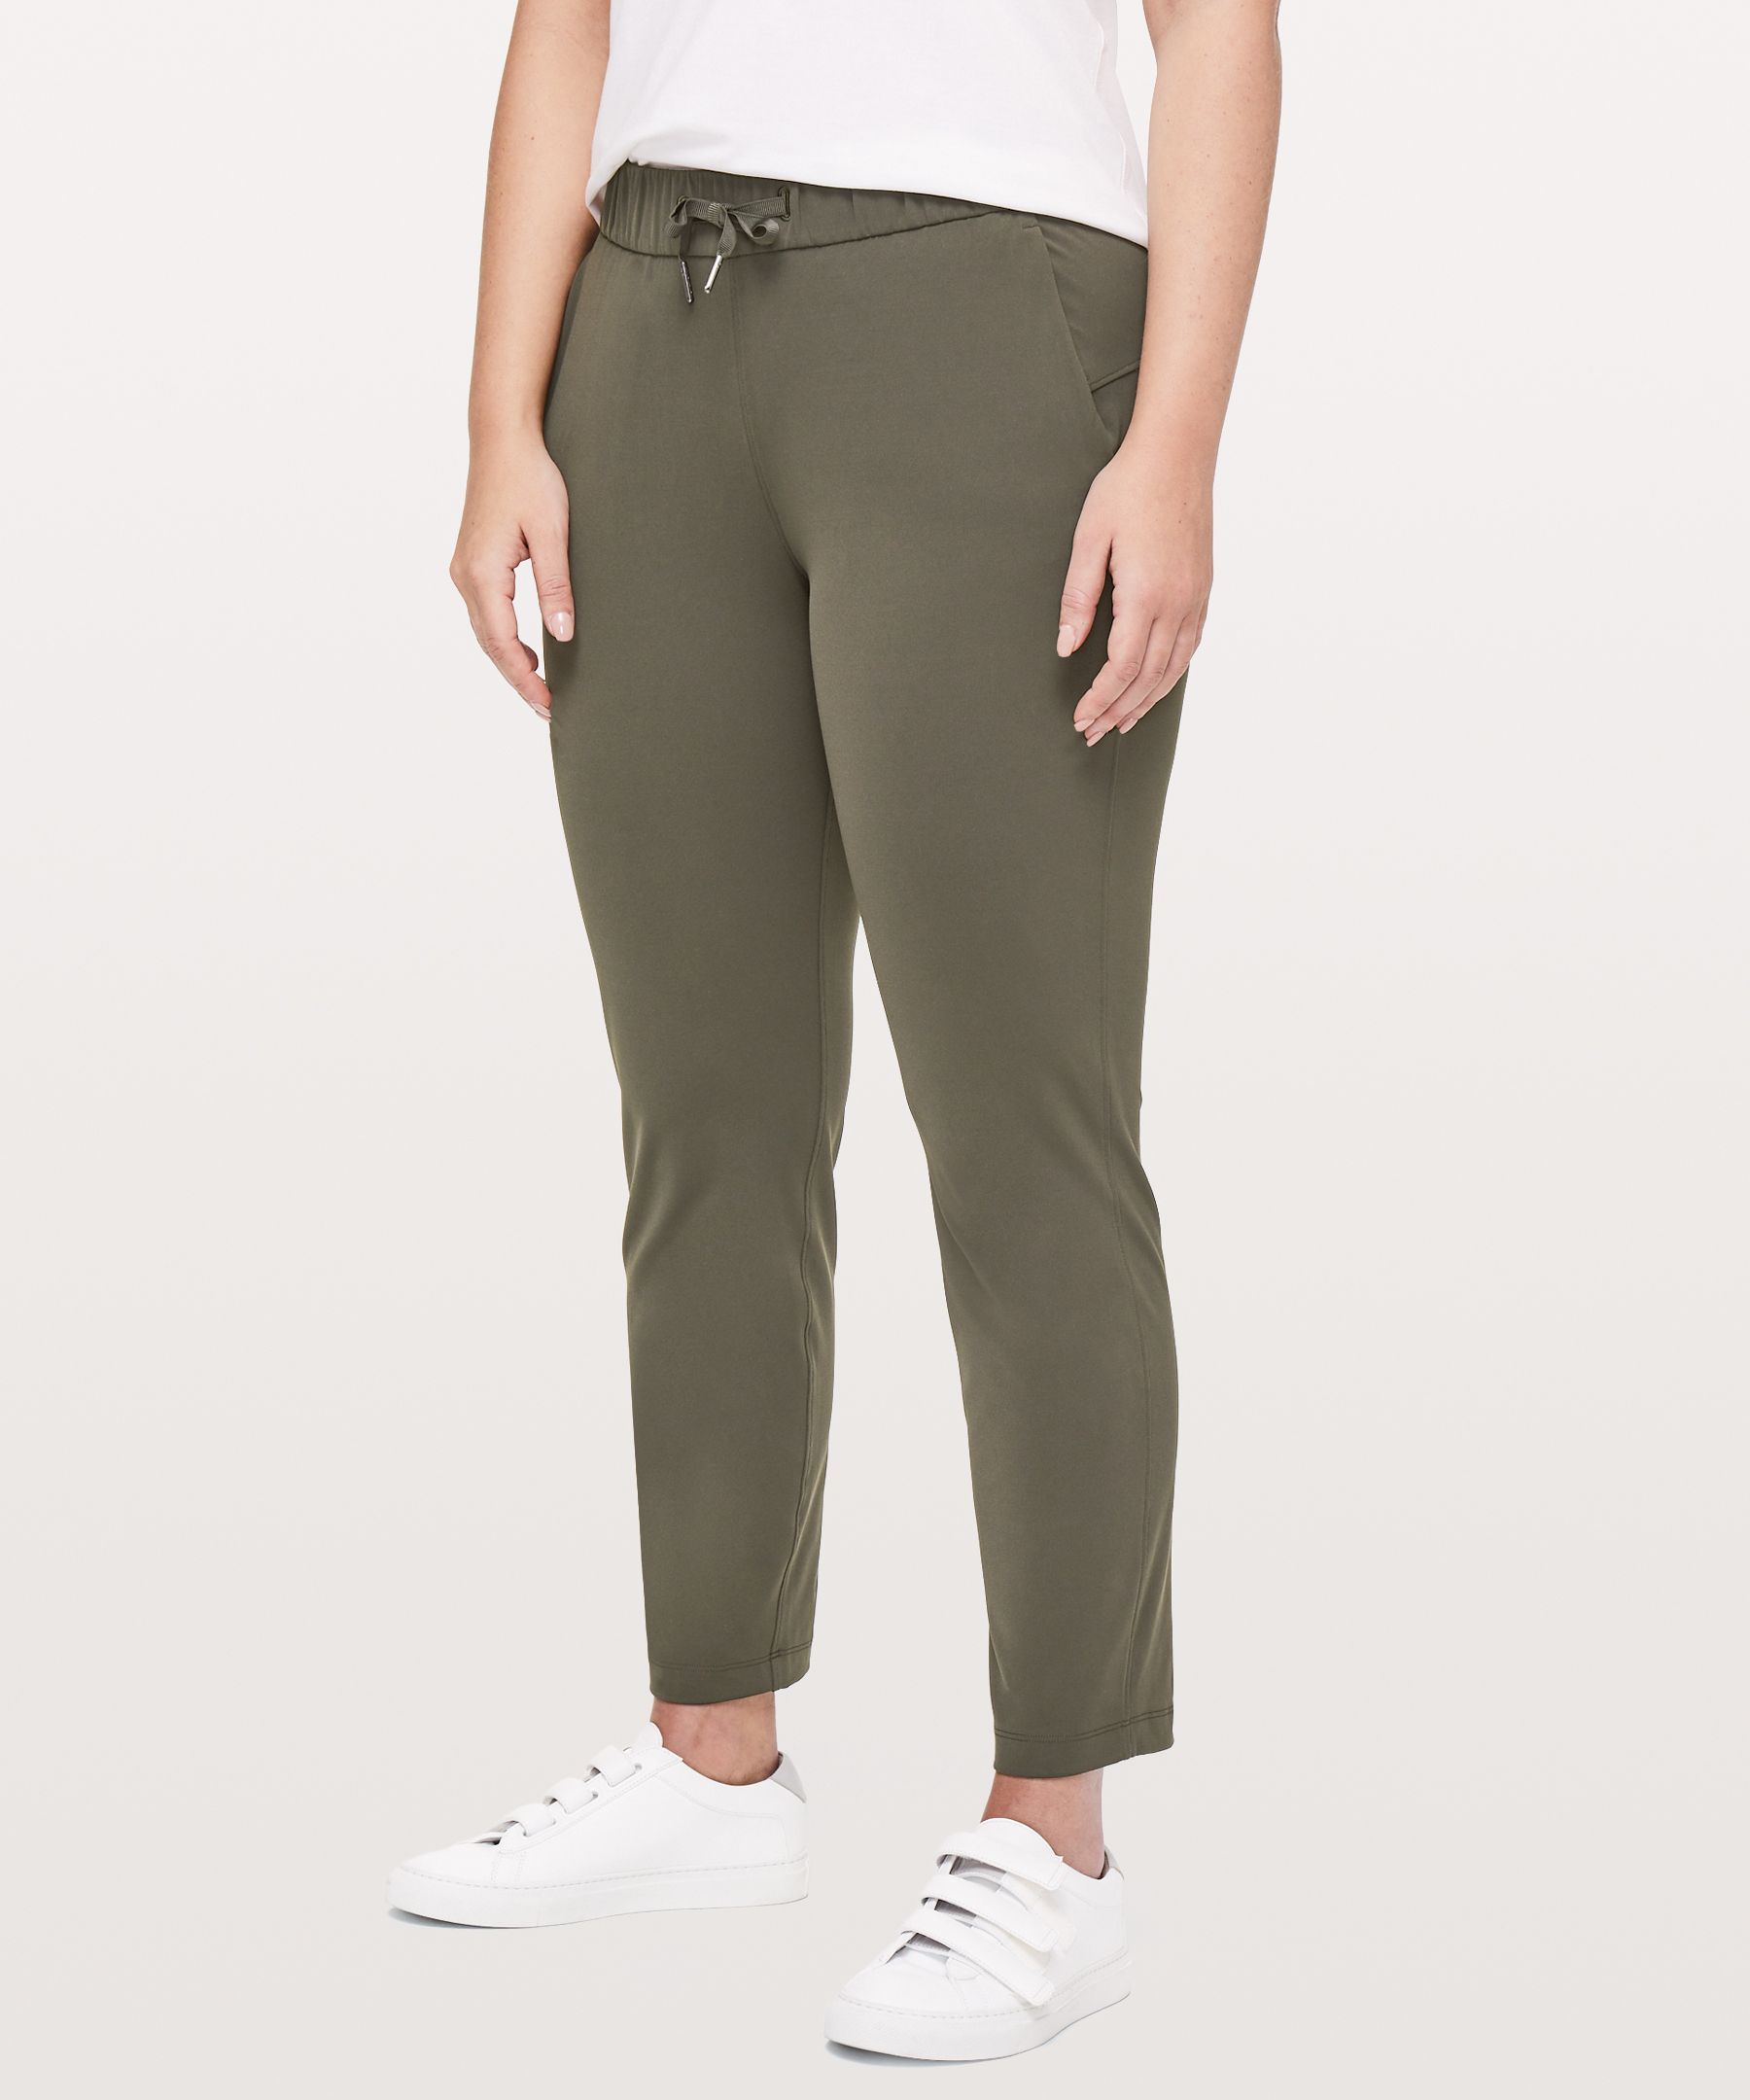 Lululemon On The Fly 7/8 Pant In Dark Olive